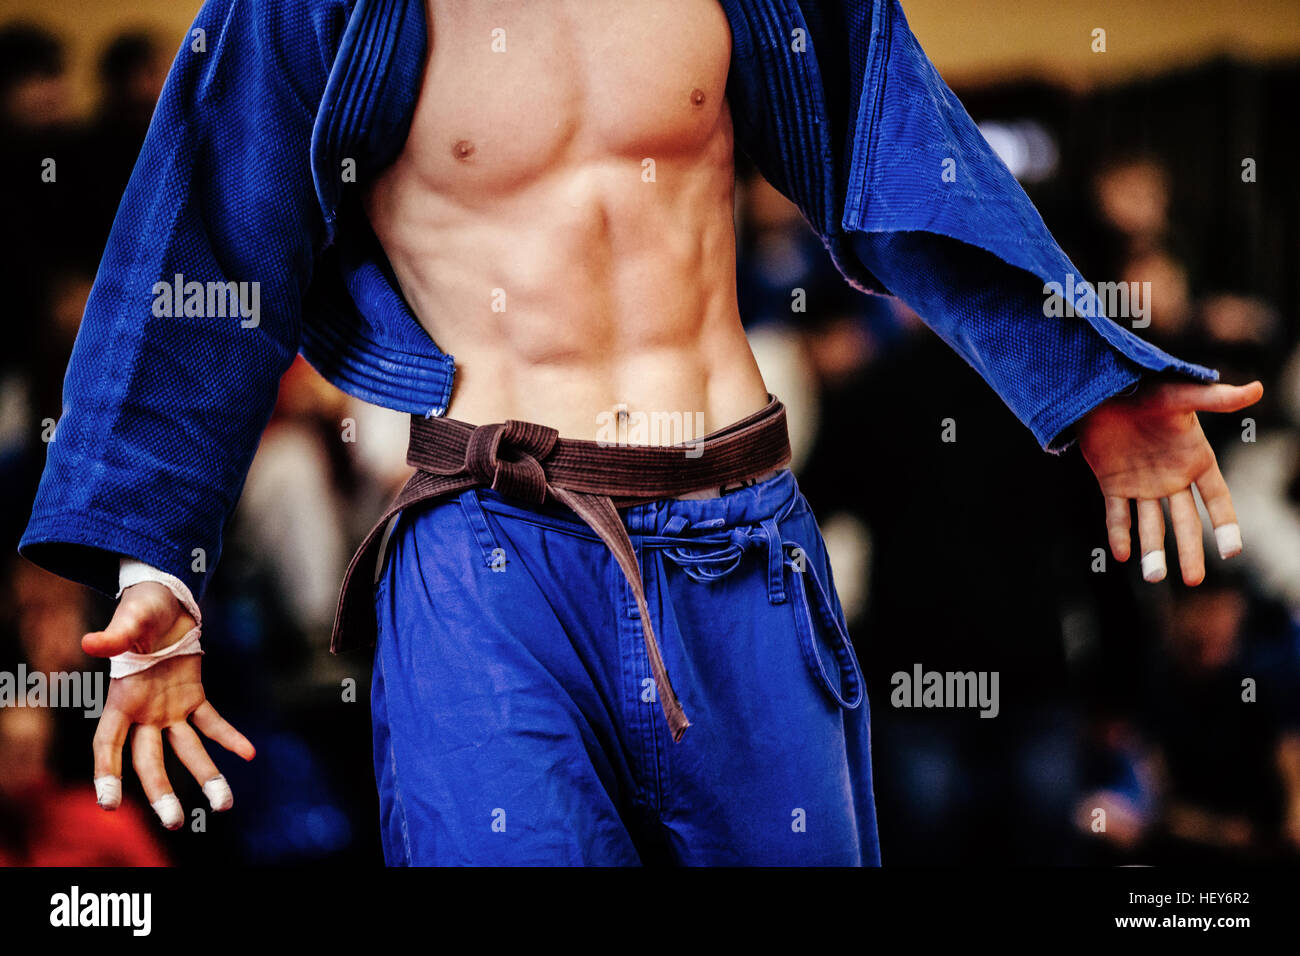 muscular body in sixpack of athlete judoka in blue kimono with brown belt Stock Photo